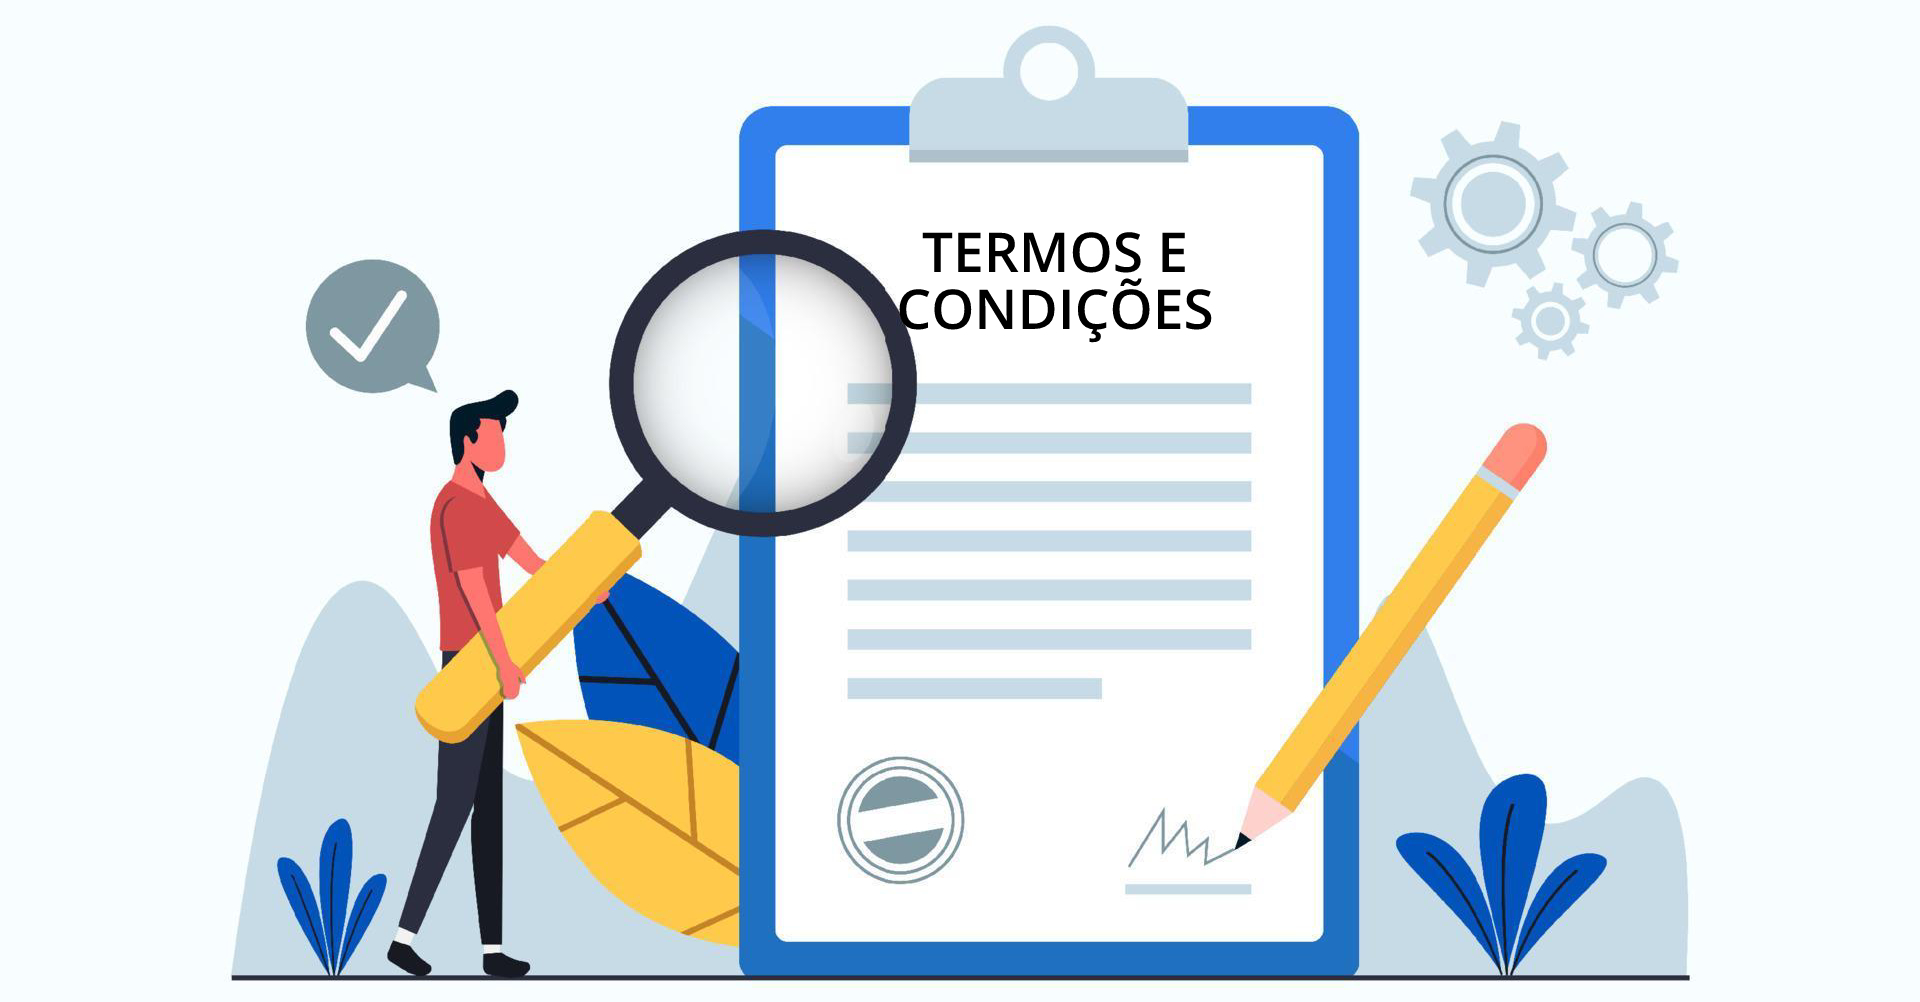 9268574-termos-e-condicoes-conceito-legal-design-man-checking-form-and-agree-with-the-terms-and-conditions-vetor